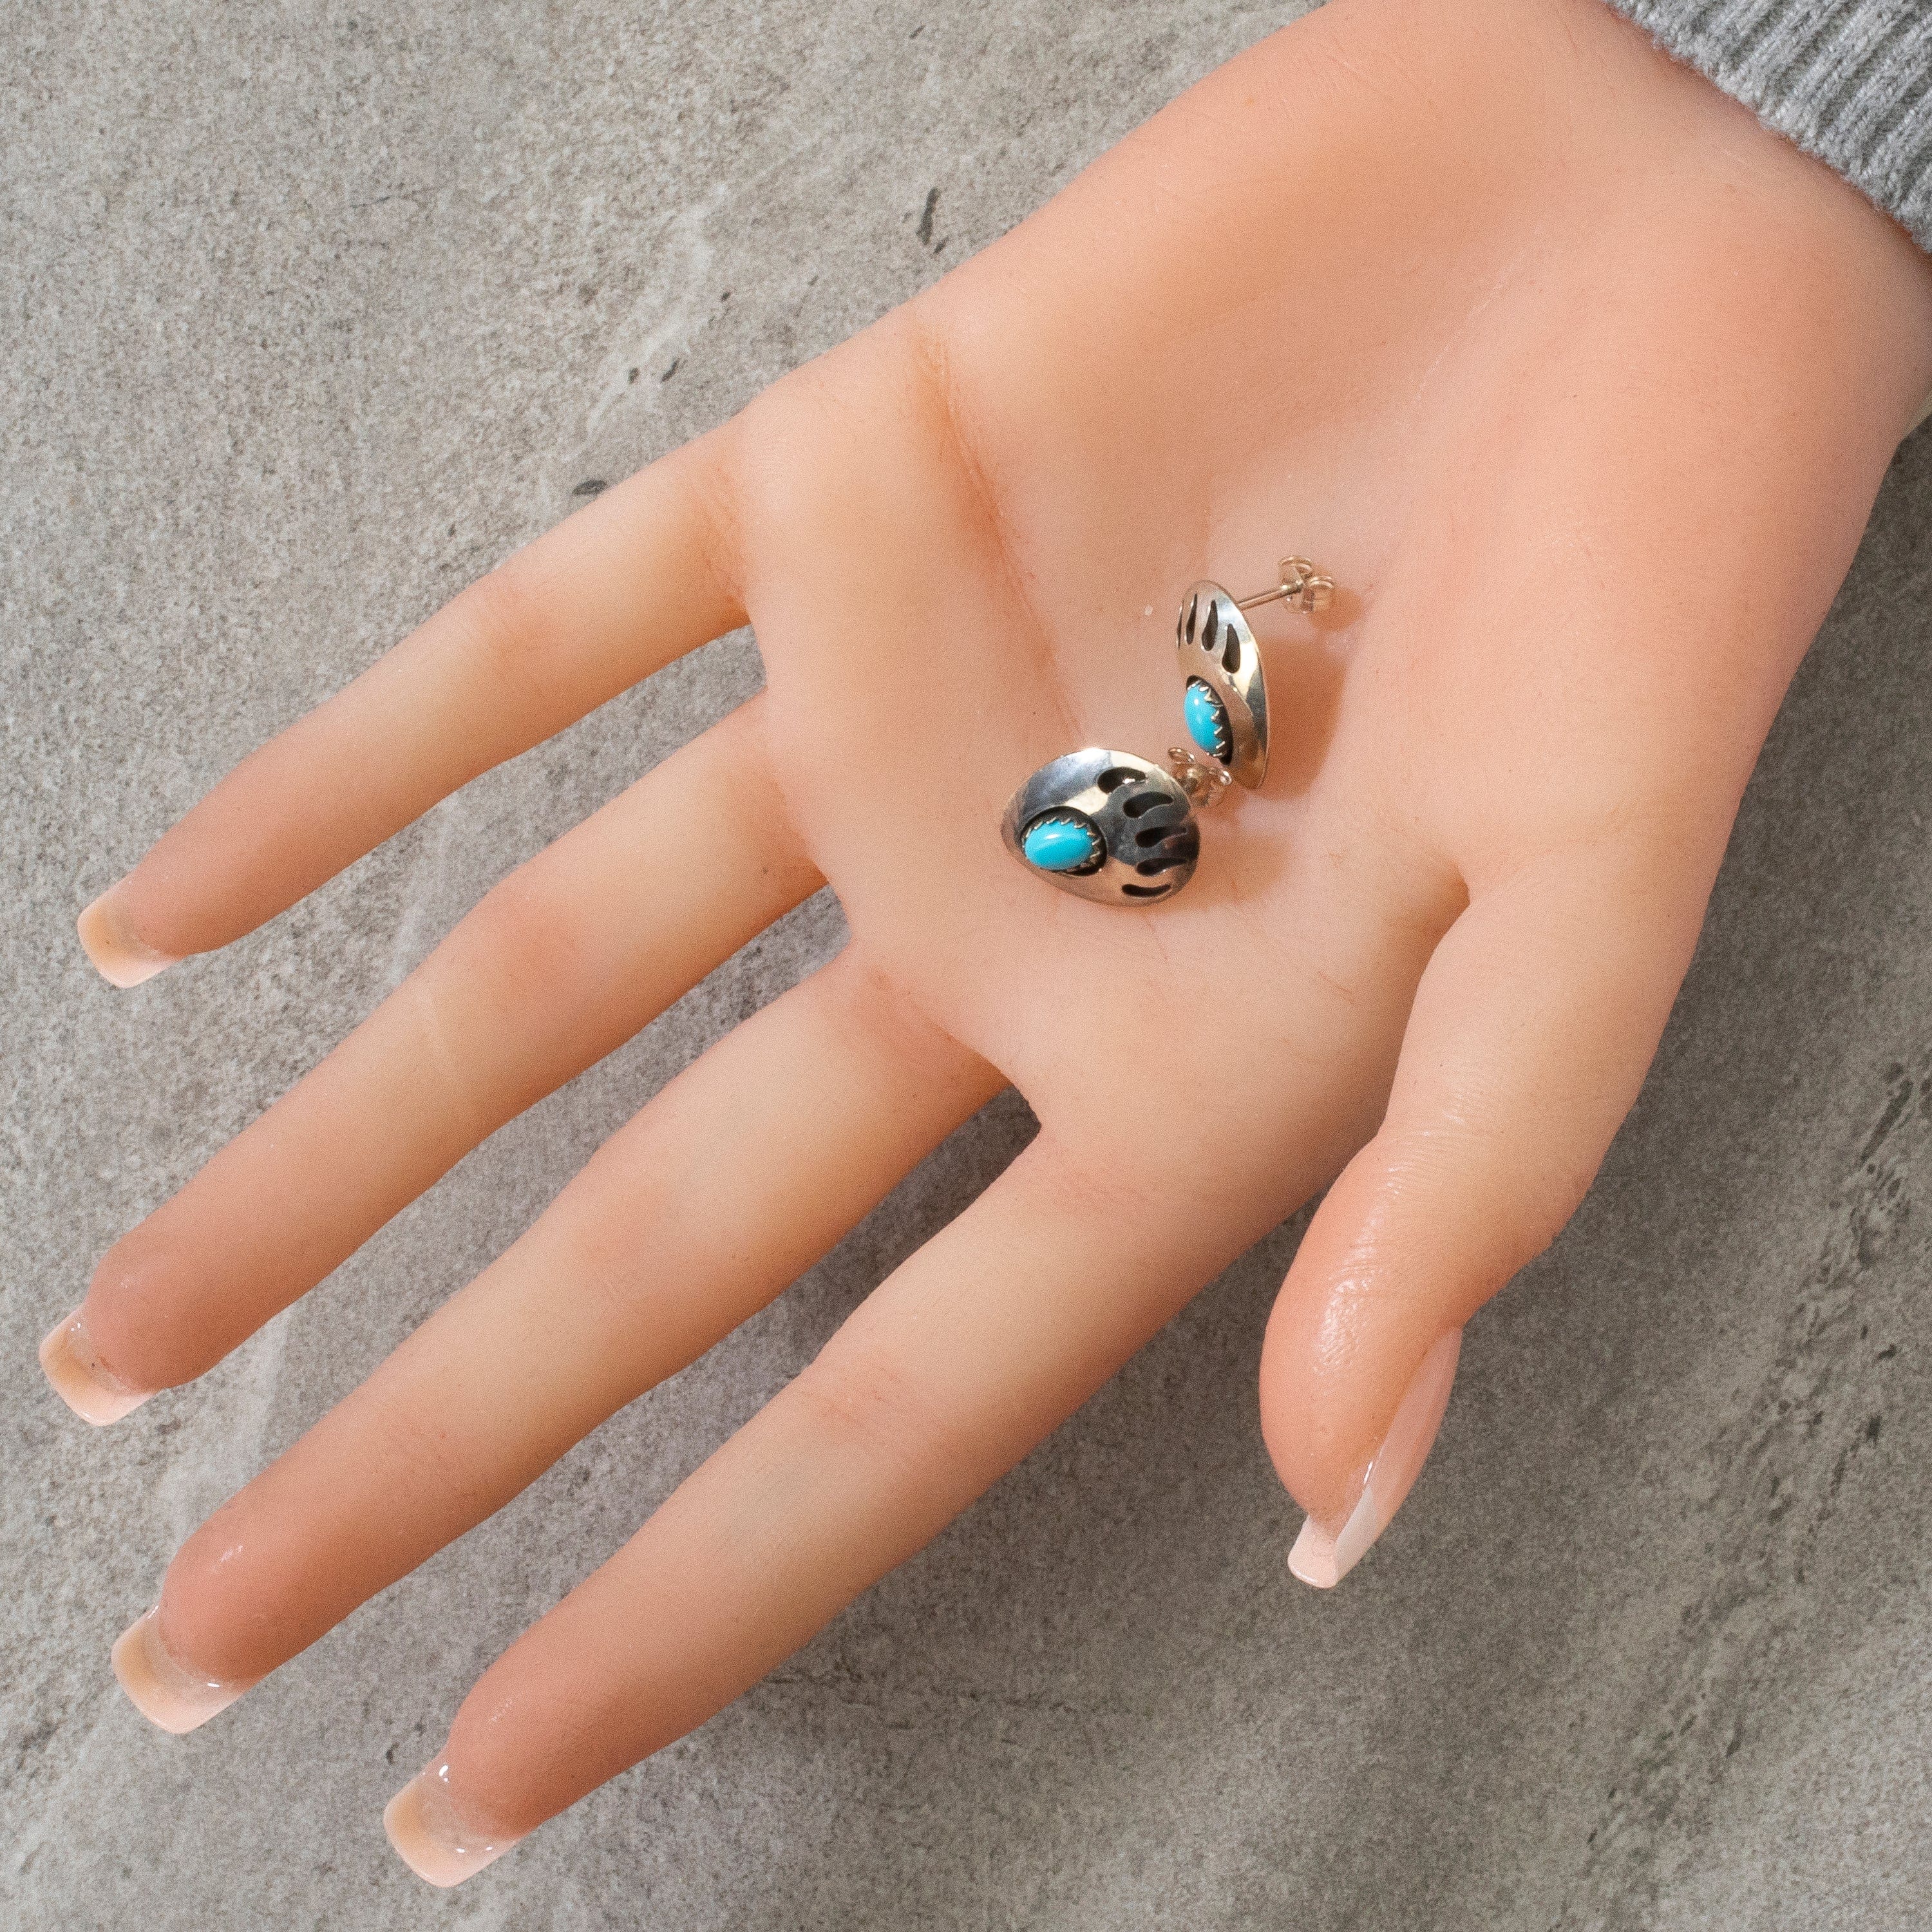 Kalifano Native American Jewelry Turquoise Bear Claw Navajo USA Native American Made 925 Sterling Silver Earrings with Stud Backing NAE140.005